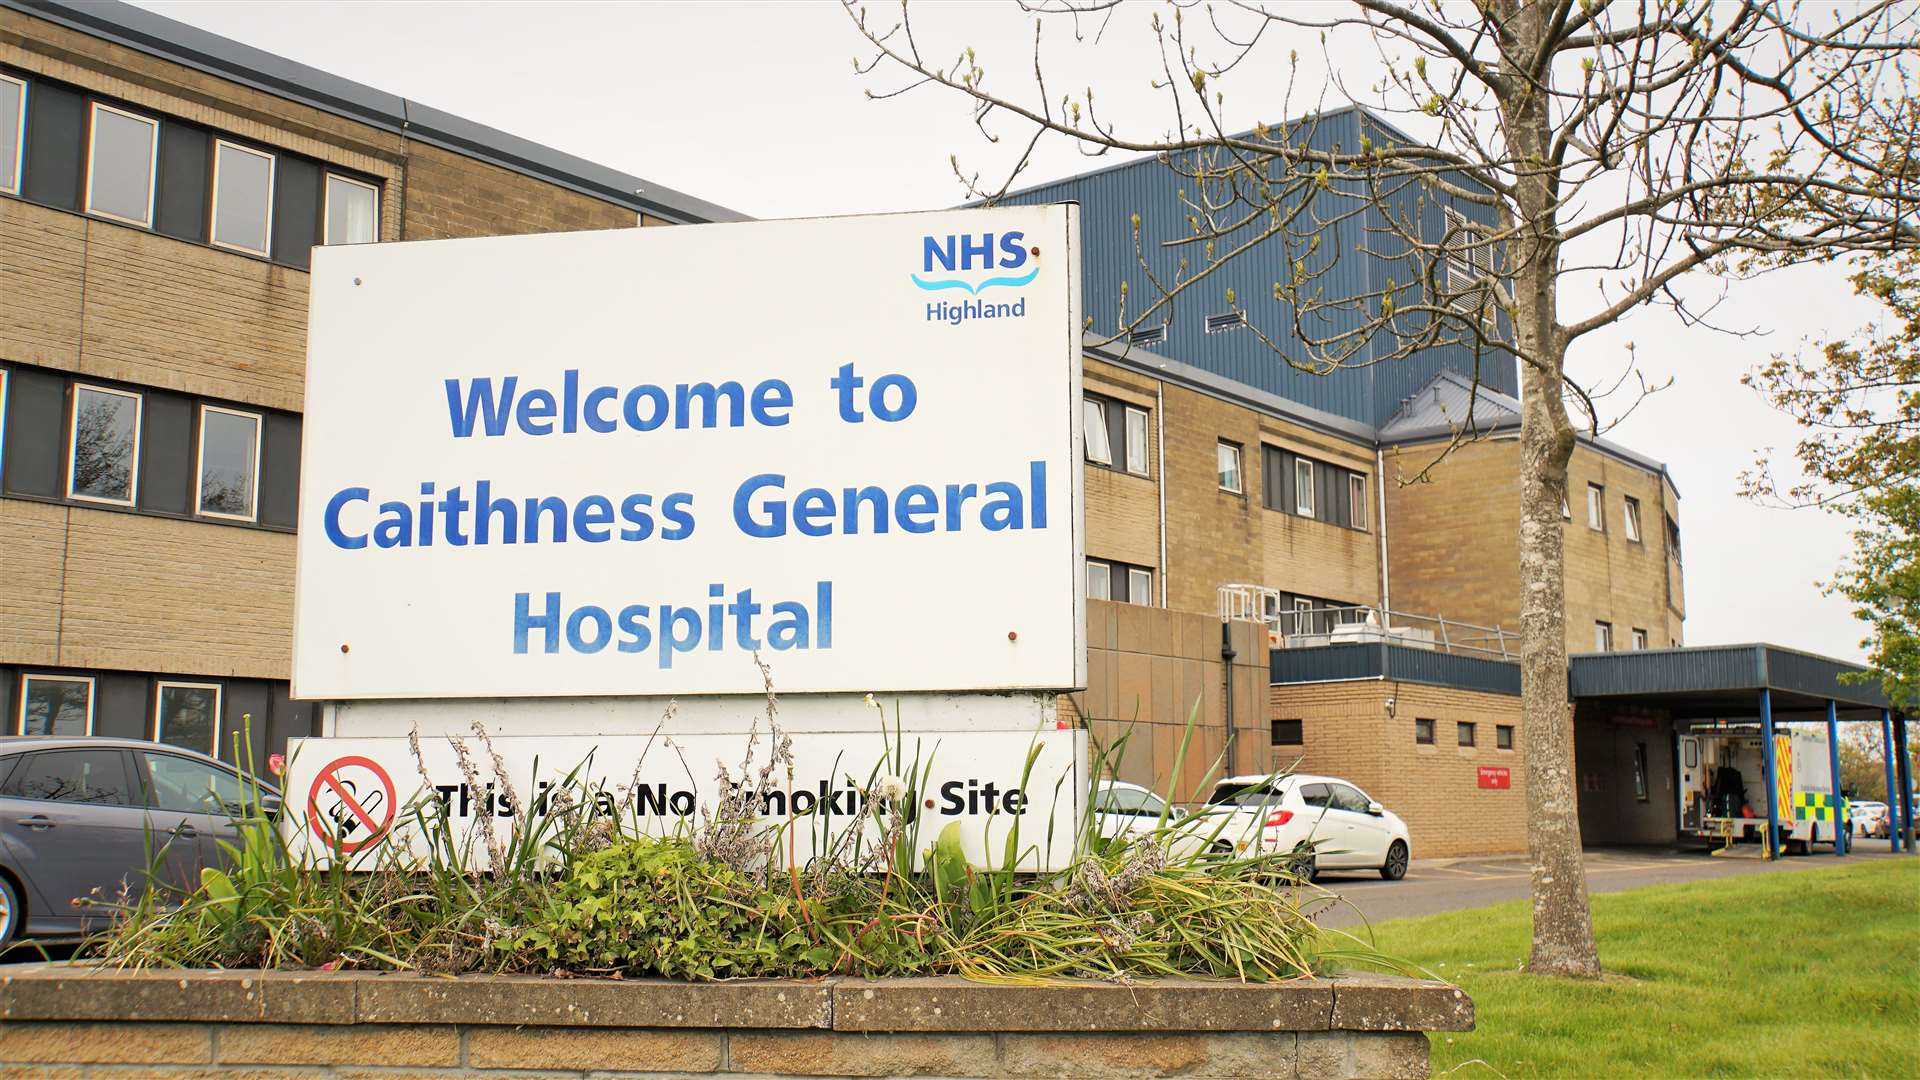 The £80 million redesign scheme included reconfiguration work at Caithness General Hospital in Wick